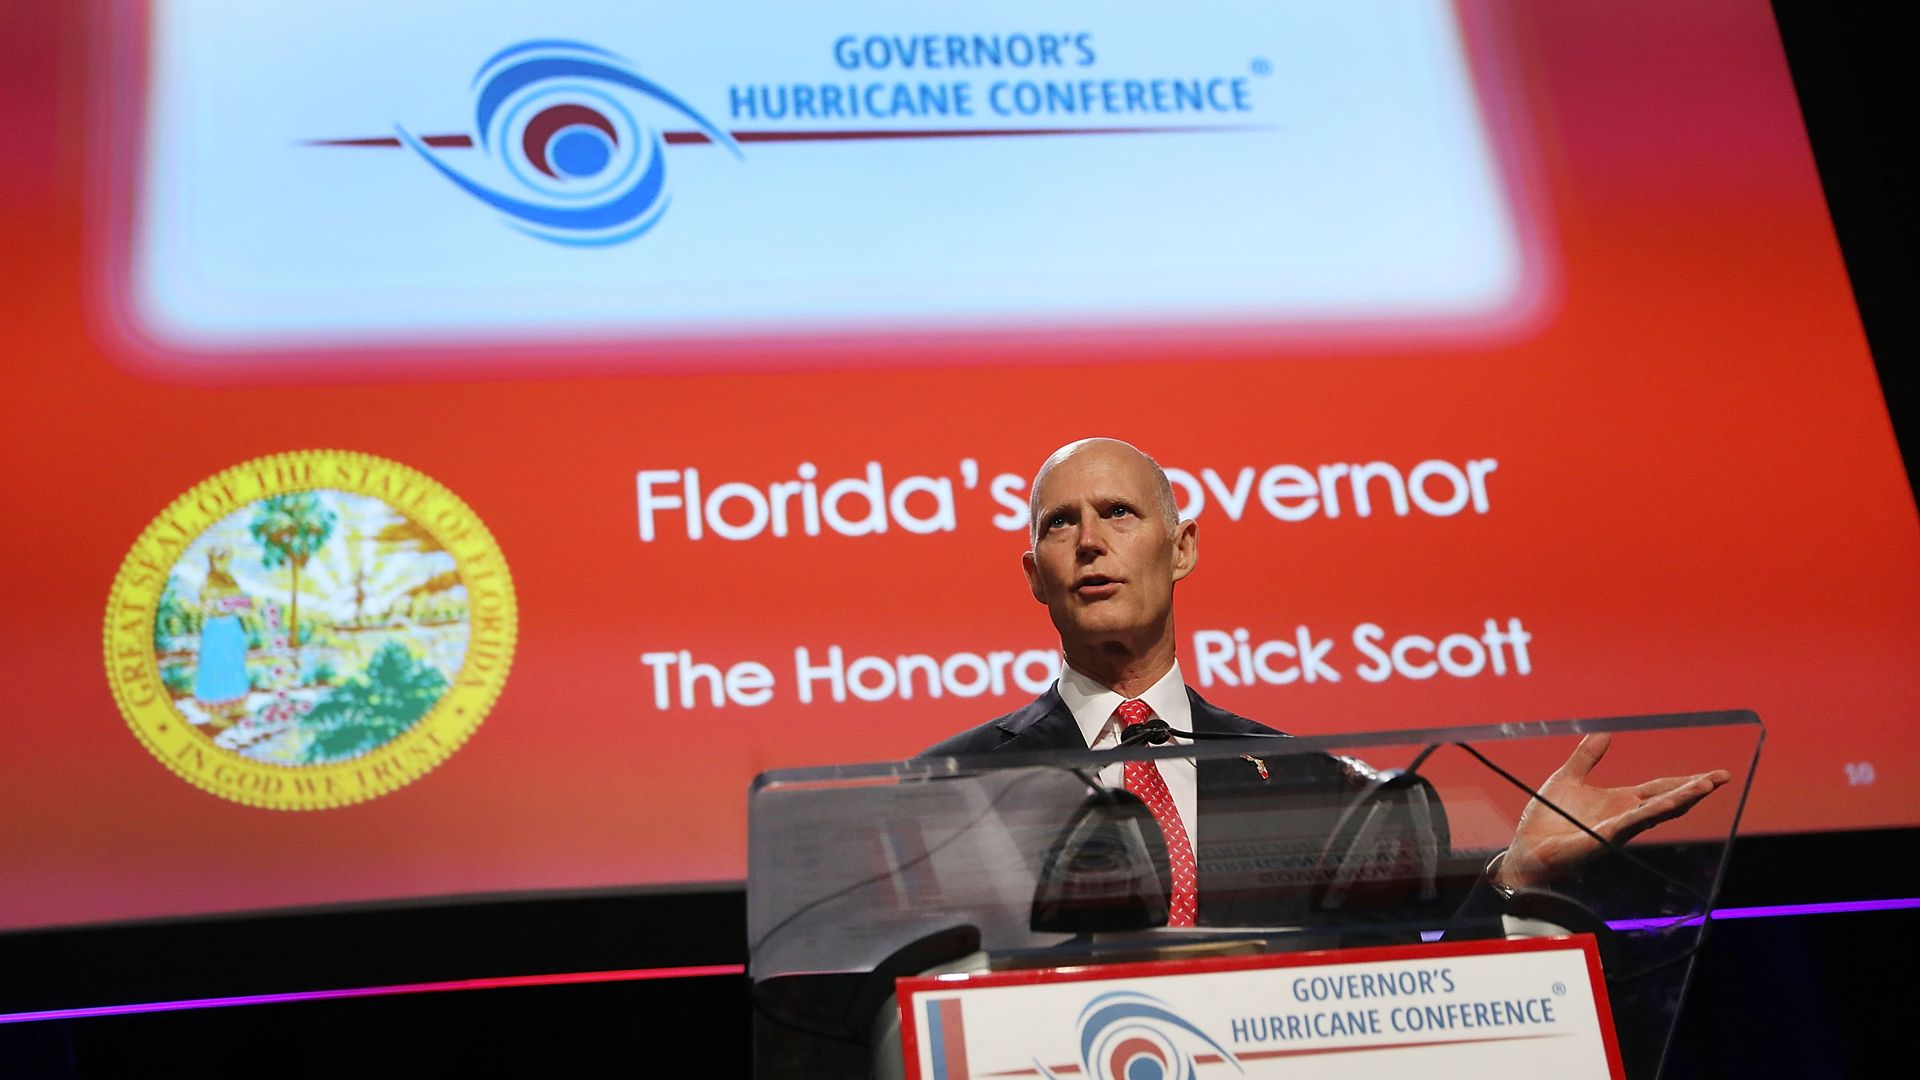 Florida Governor Rick Scott speaks during the Governor's Hurricane Conference